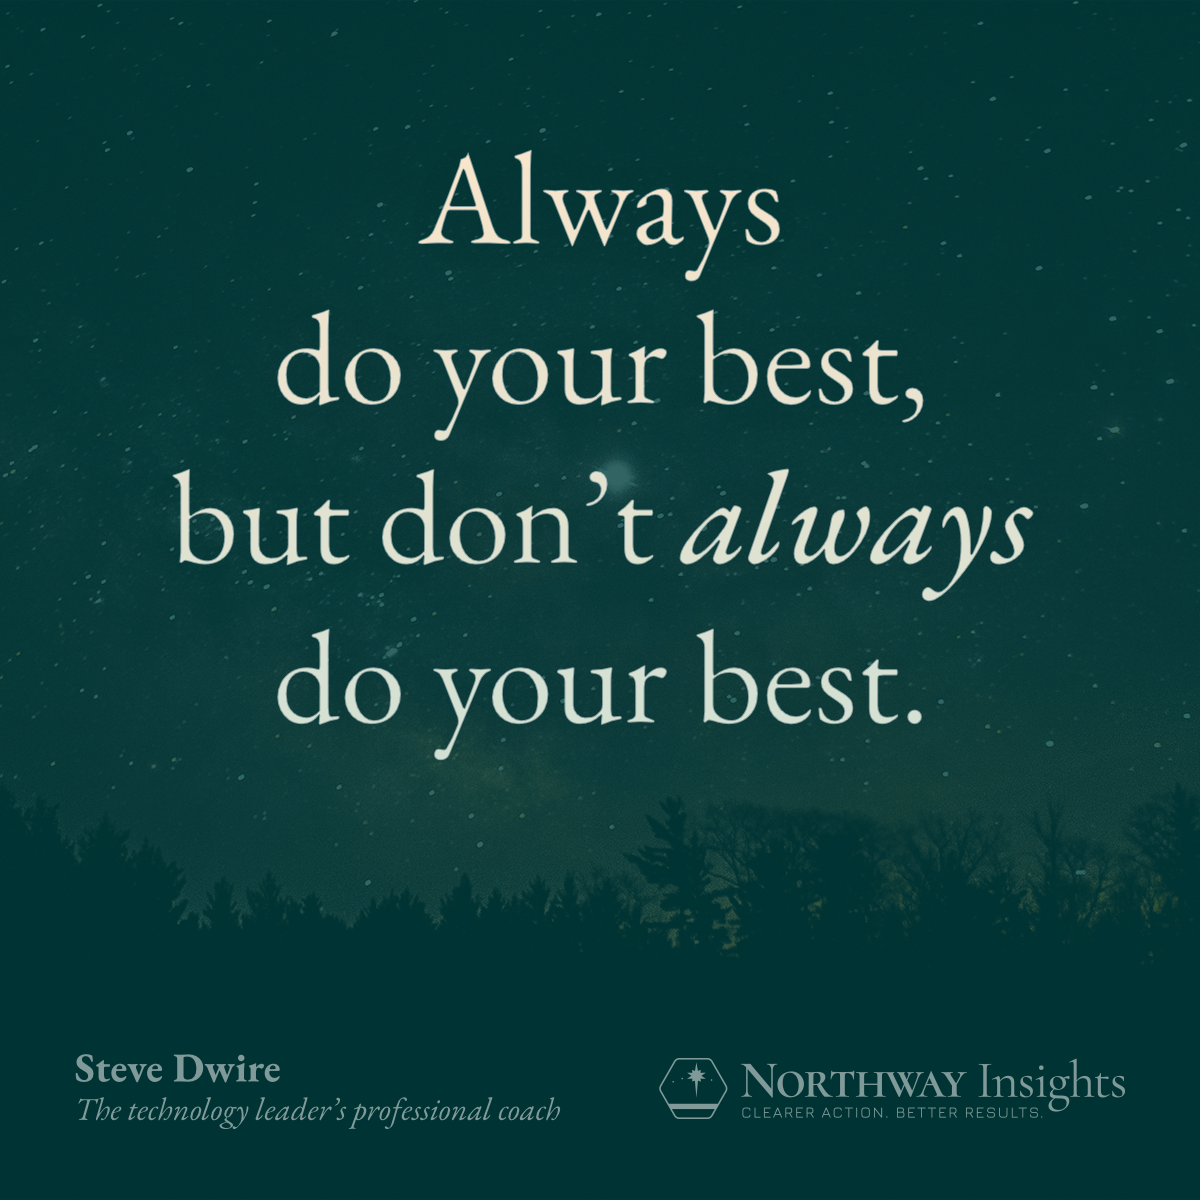 Always do your best. but don't ALWAYS do your best.